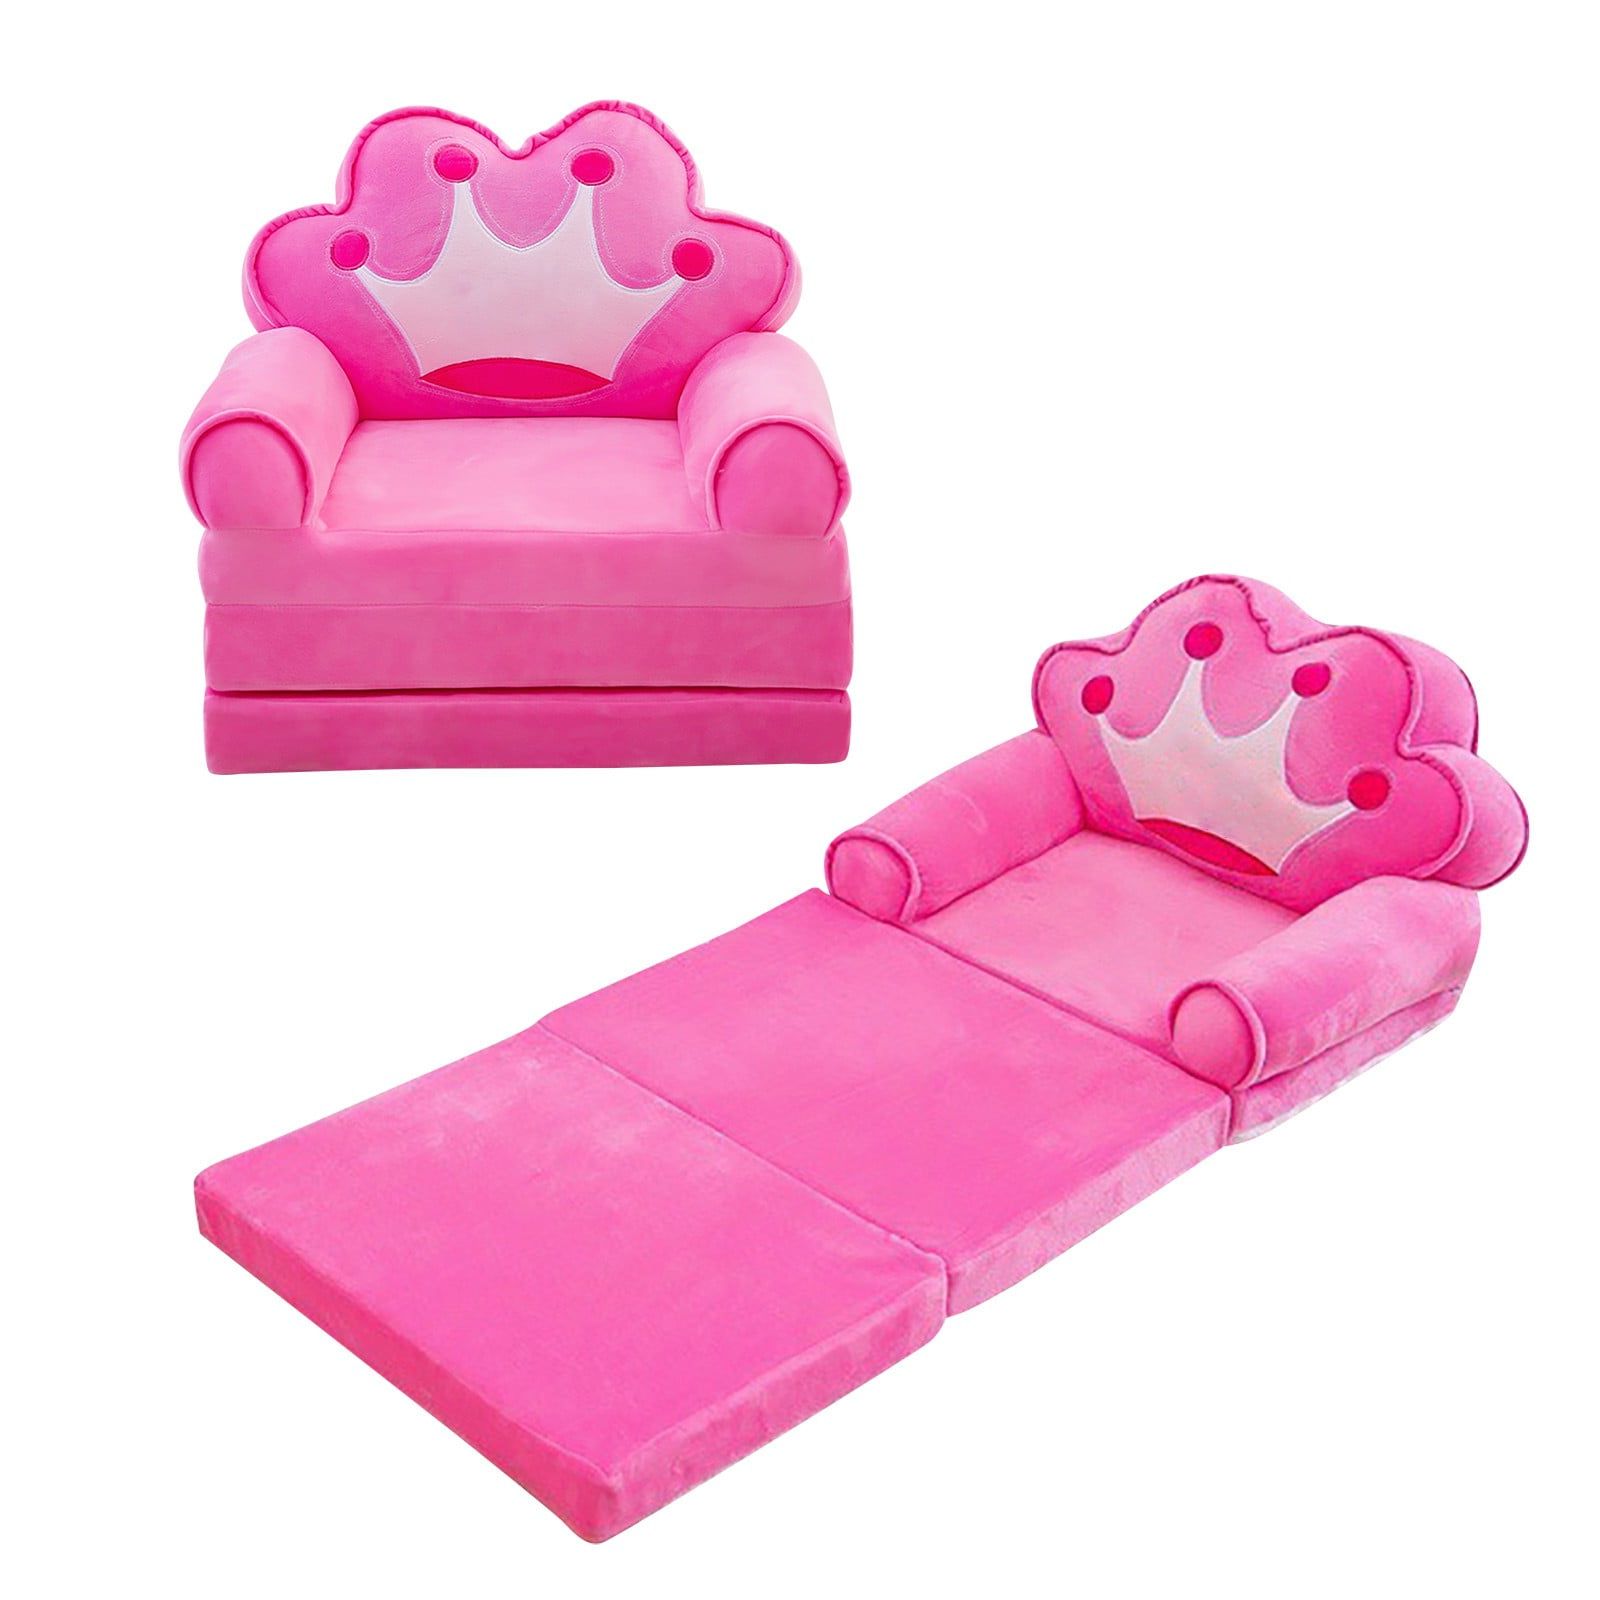 2 In 1 Foldable Children's Sofa Beds Intended For Most Popular Plush Foldable Kids Sofa Backrest Armchair 2 In 1 Foldable Children (Photo 11 of 15)